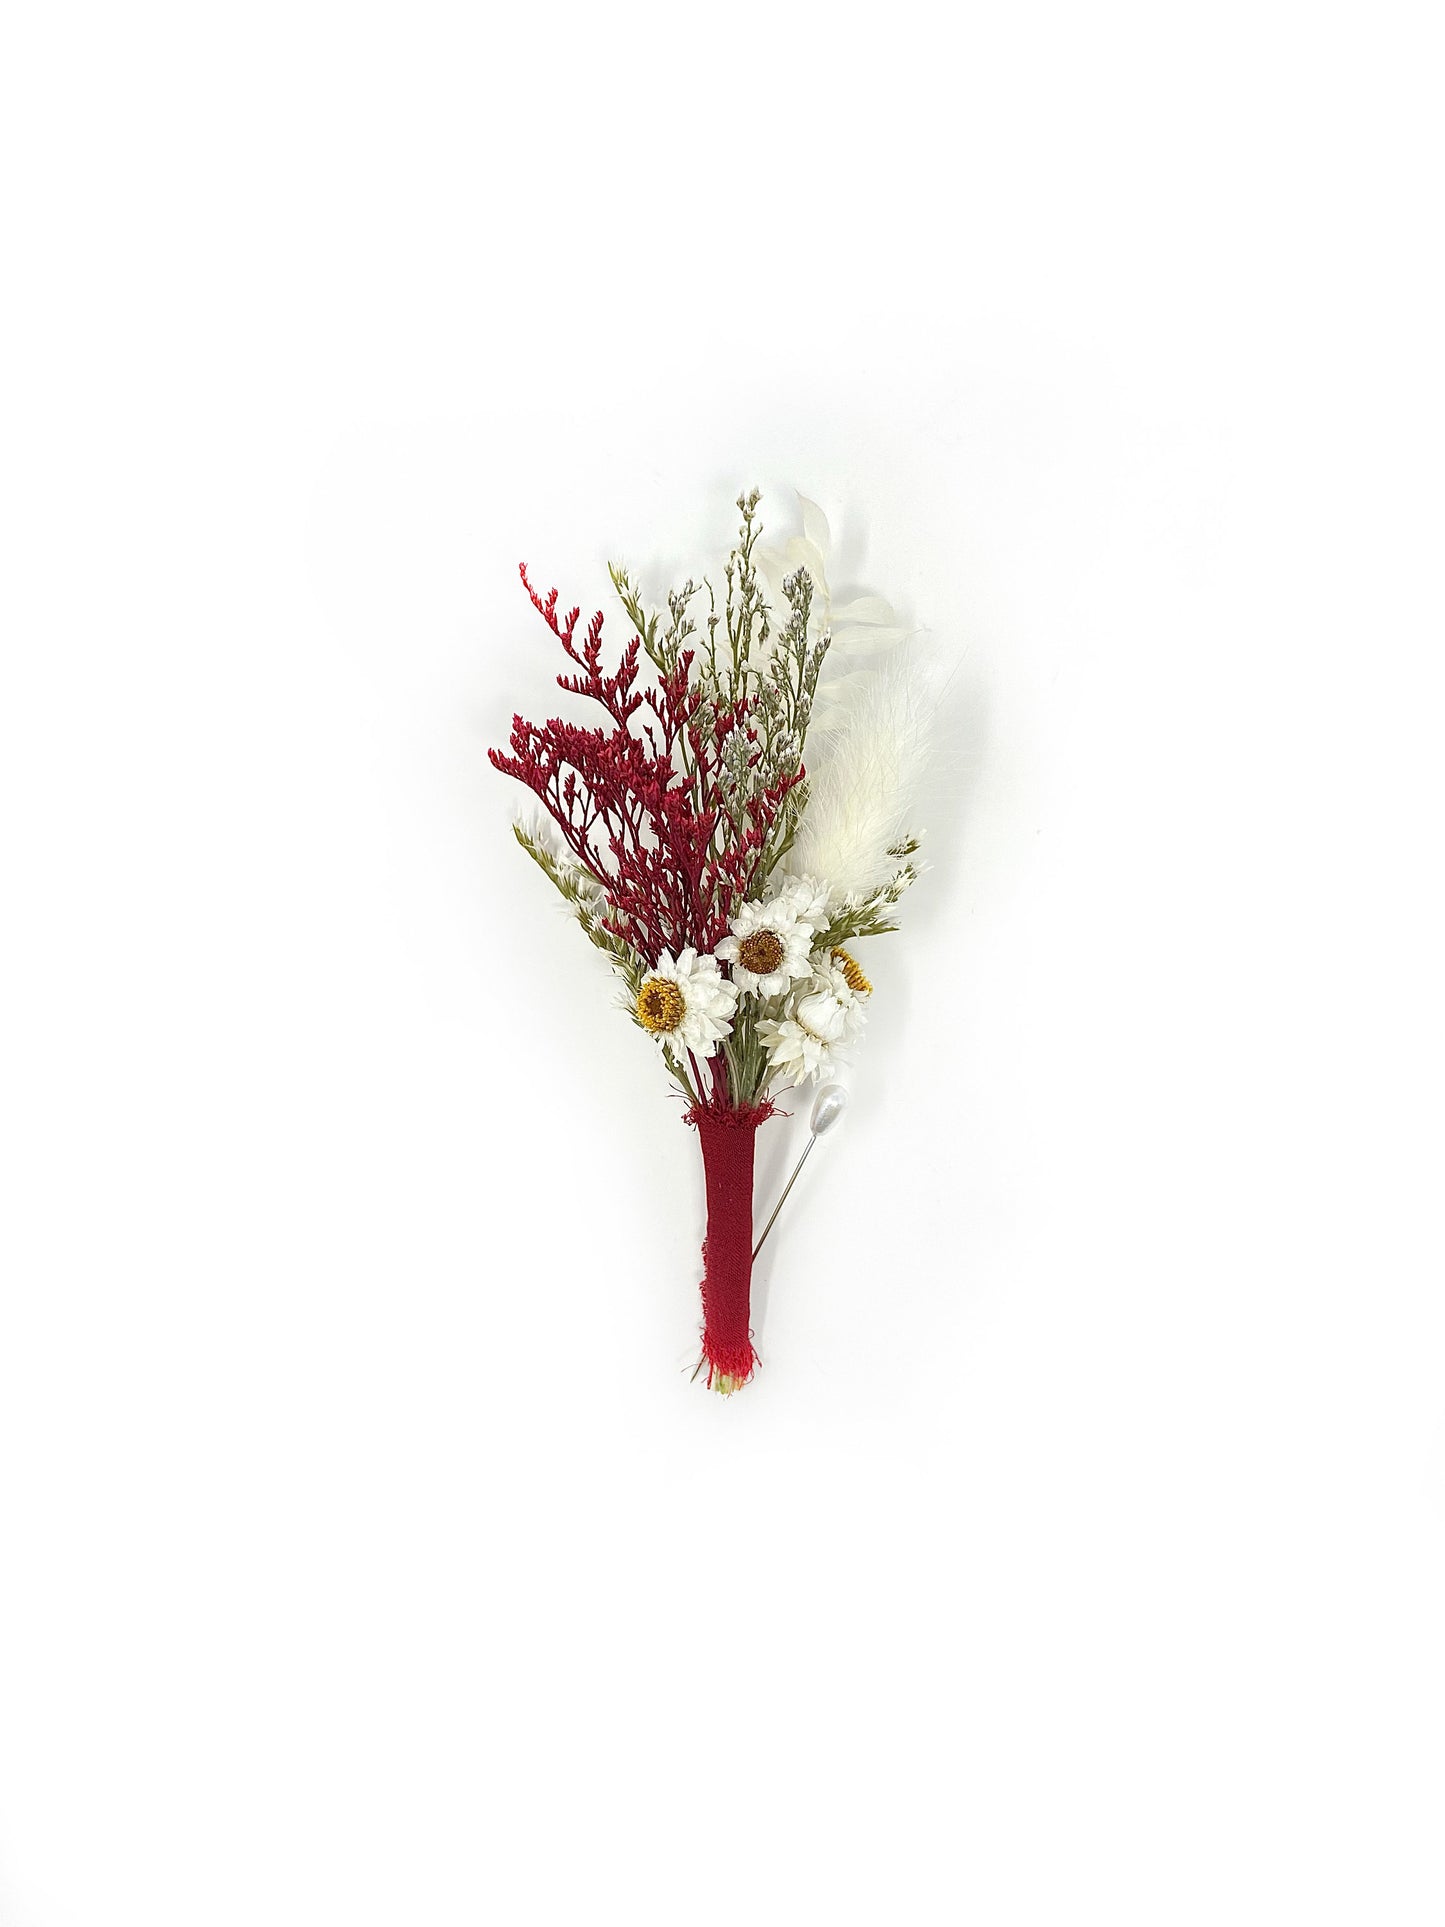 Red and White Hair Comb, Hair Pins, Burgundy Wedding Accessory, Floral Preserved Clip, Dried Flowers, Prom, Hair Accessory, Simple, Bridal